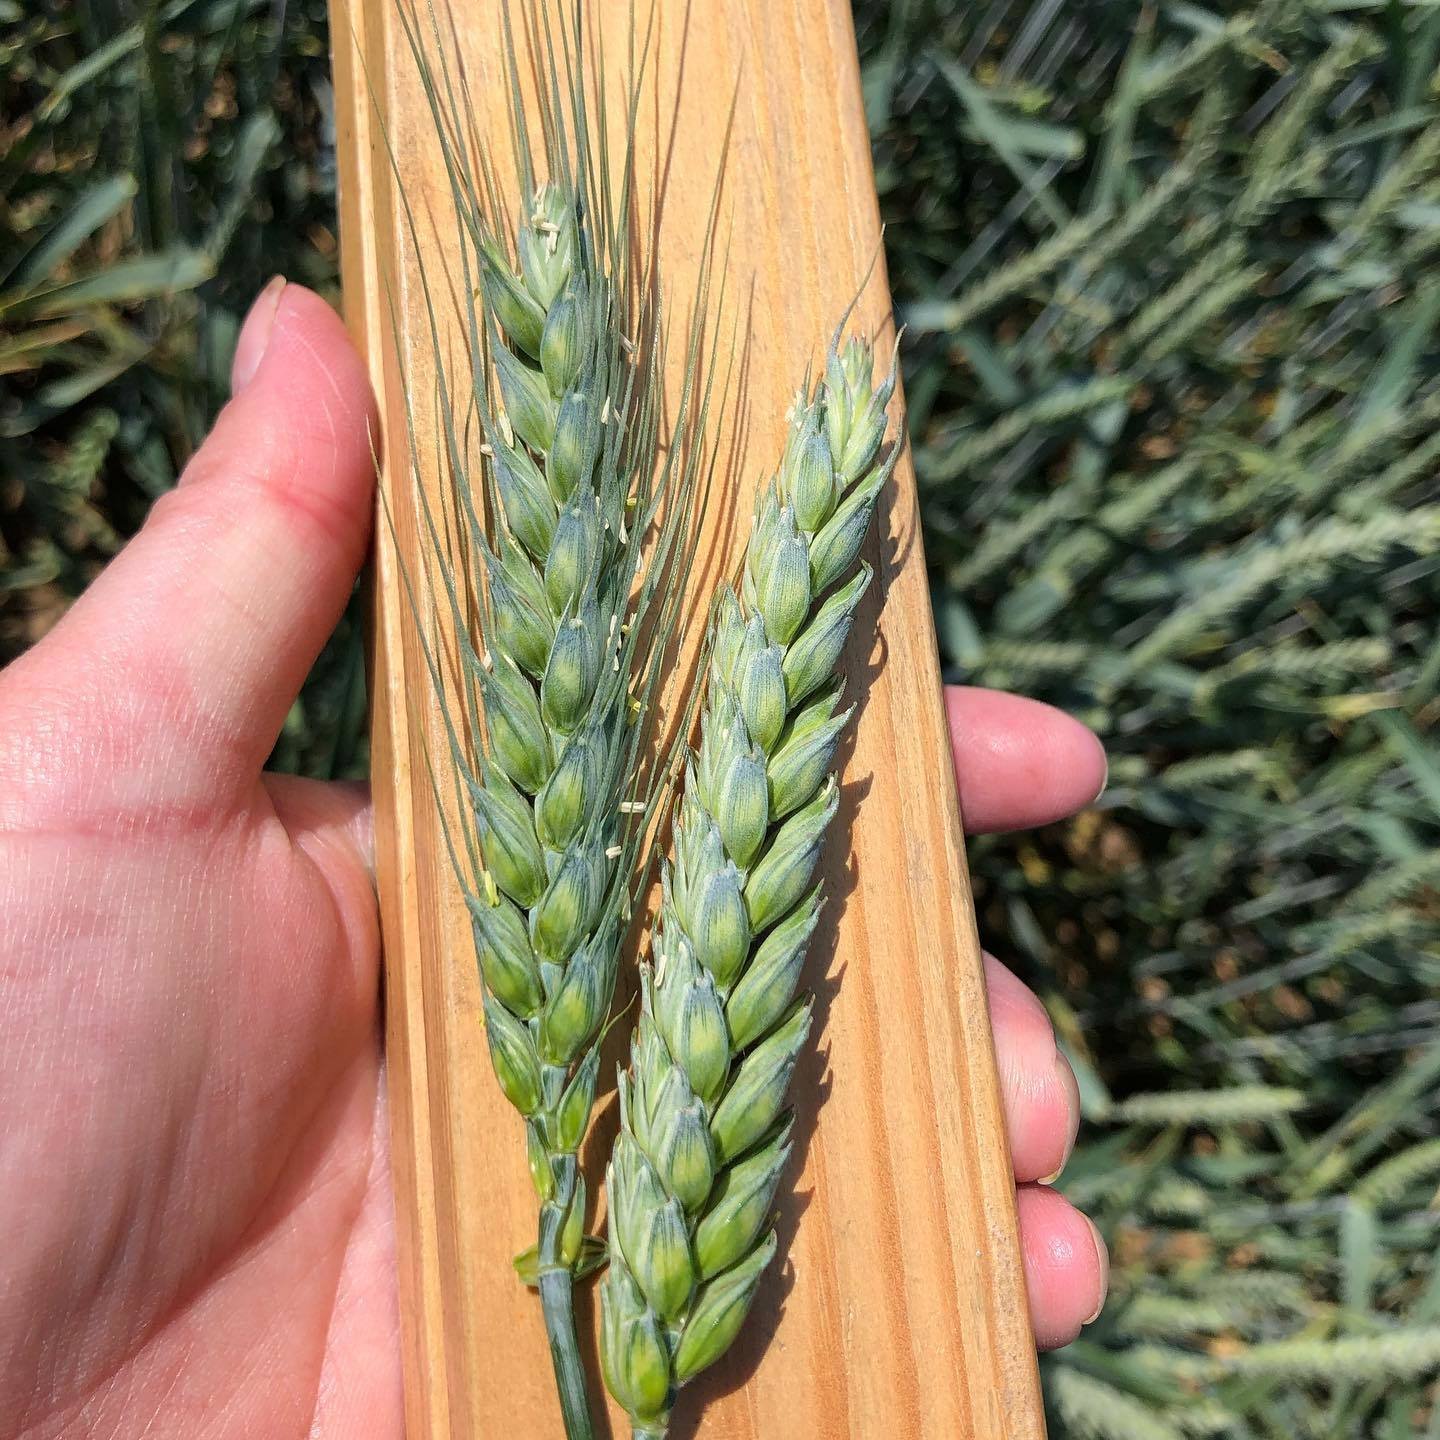 2 different varieties of Wheat